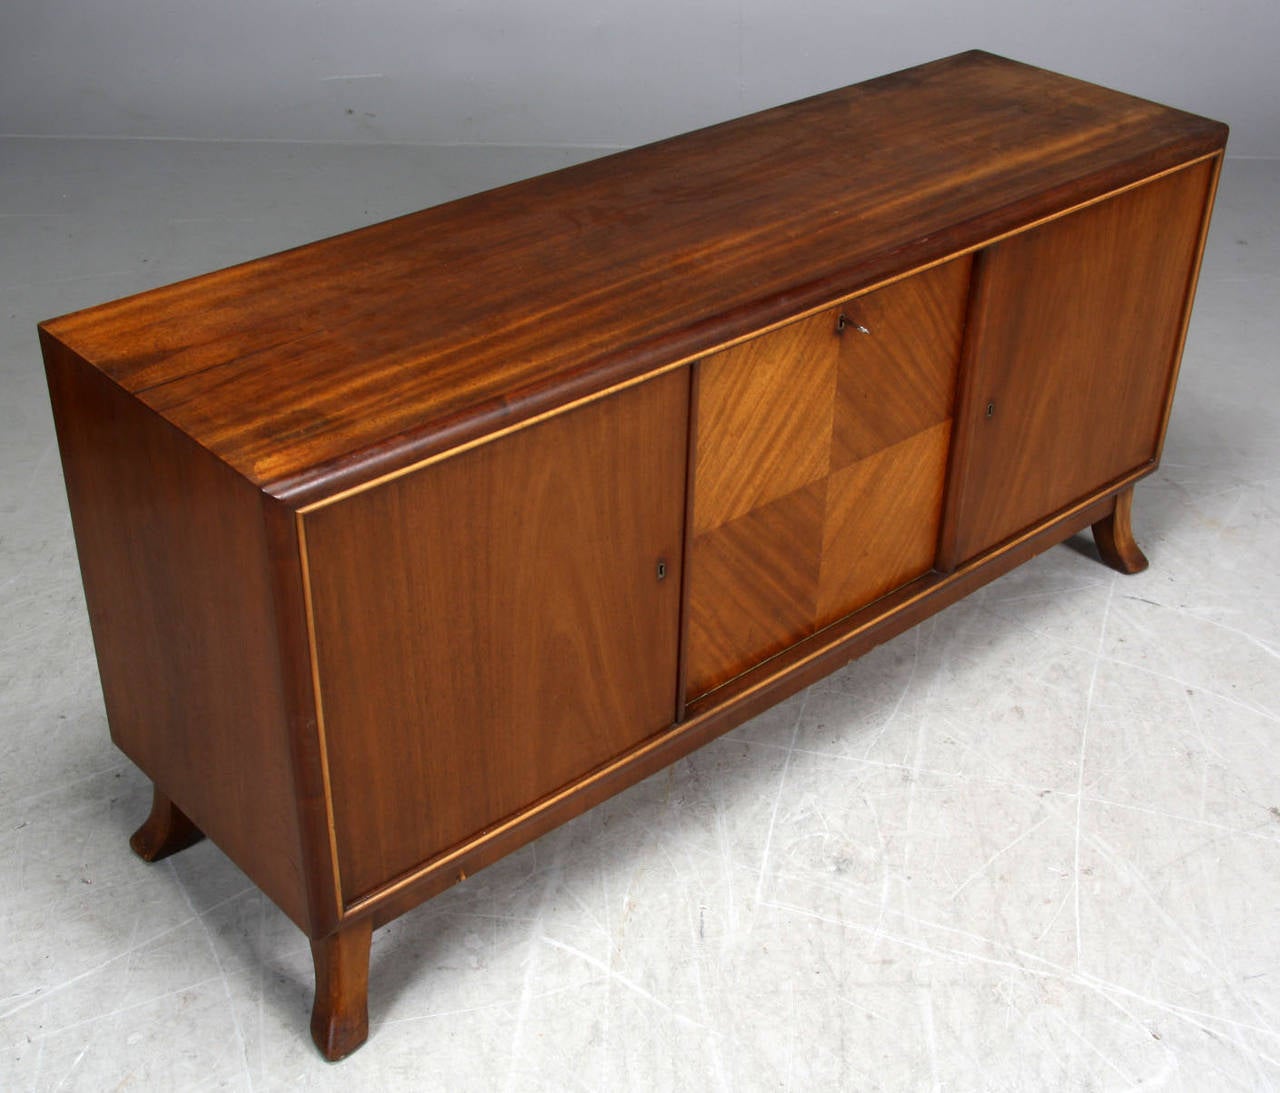 Danish cabinet maker 1940s figured mahogany sideboard/buffet. The sideboard with a decorative quarter veneered center panel. The interior fitted with drawers and shelving. The sideboard raised on four splayed legs.